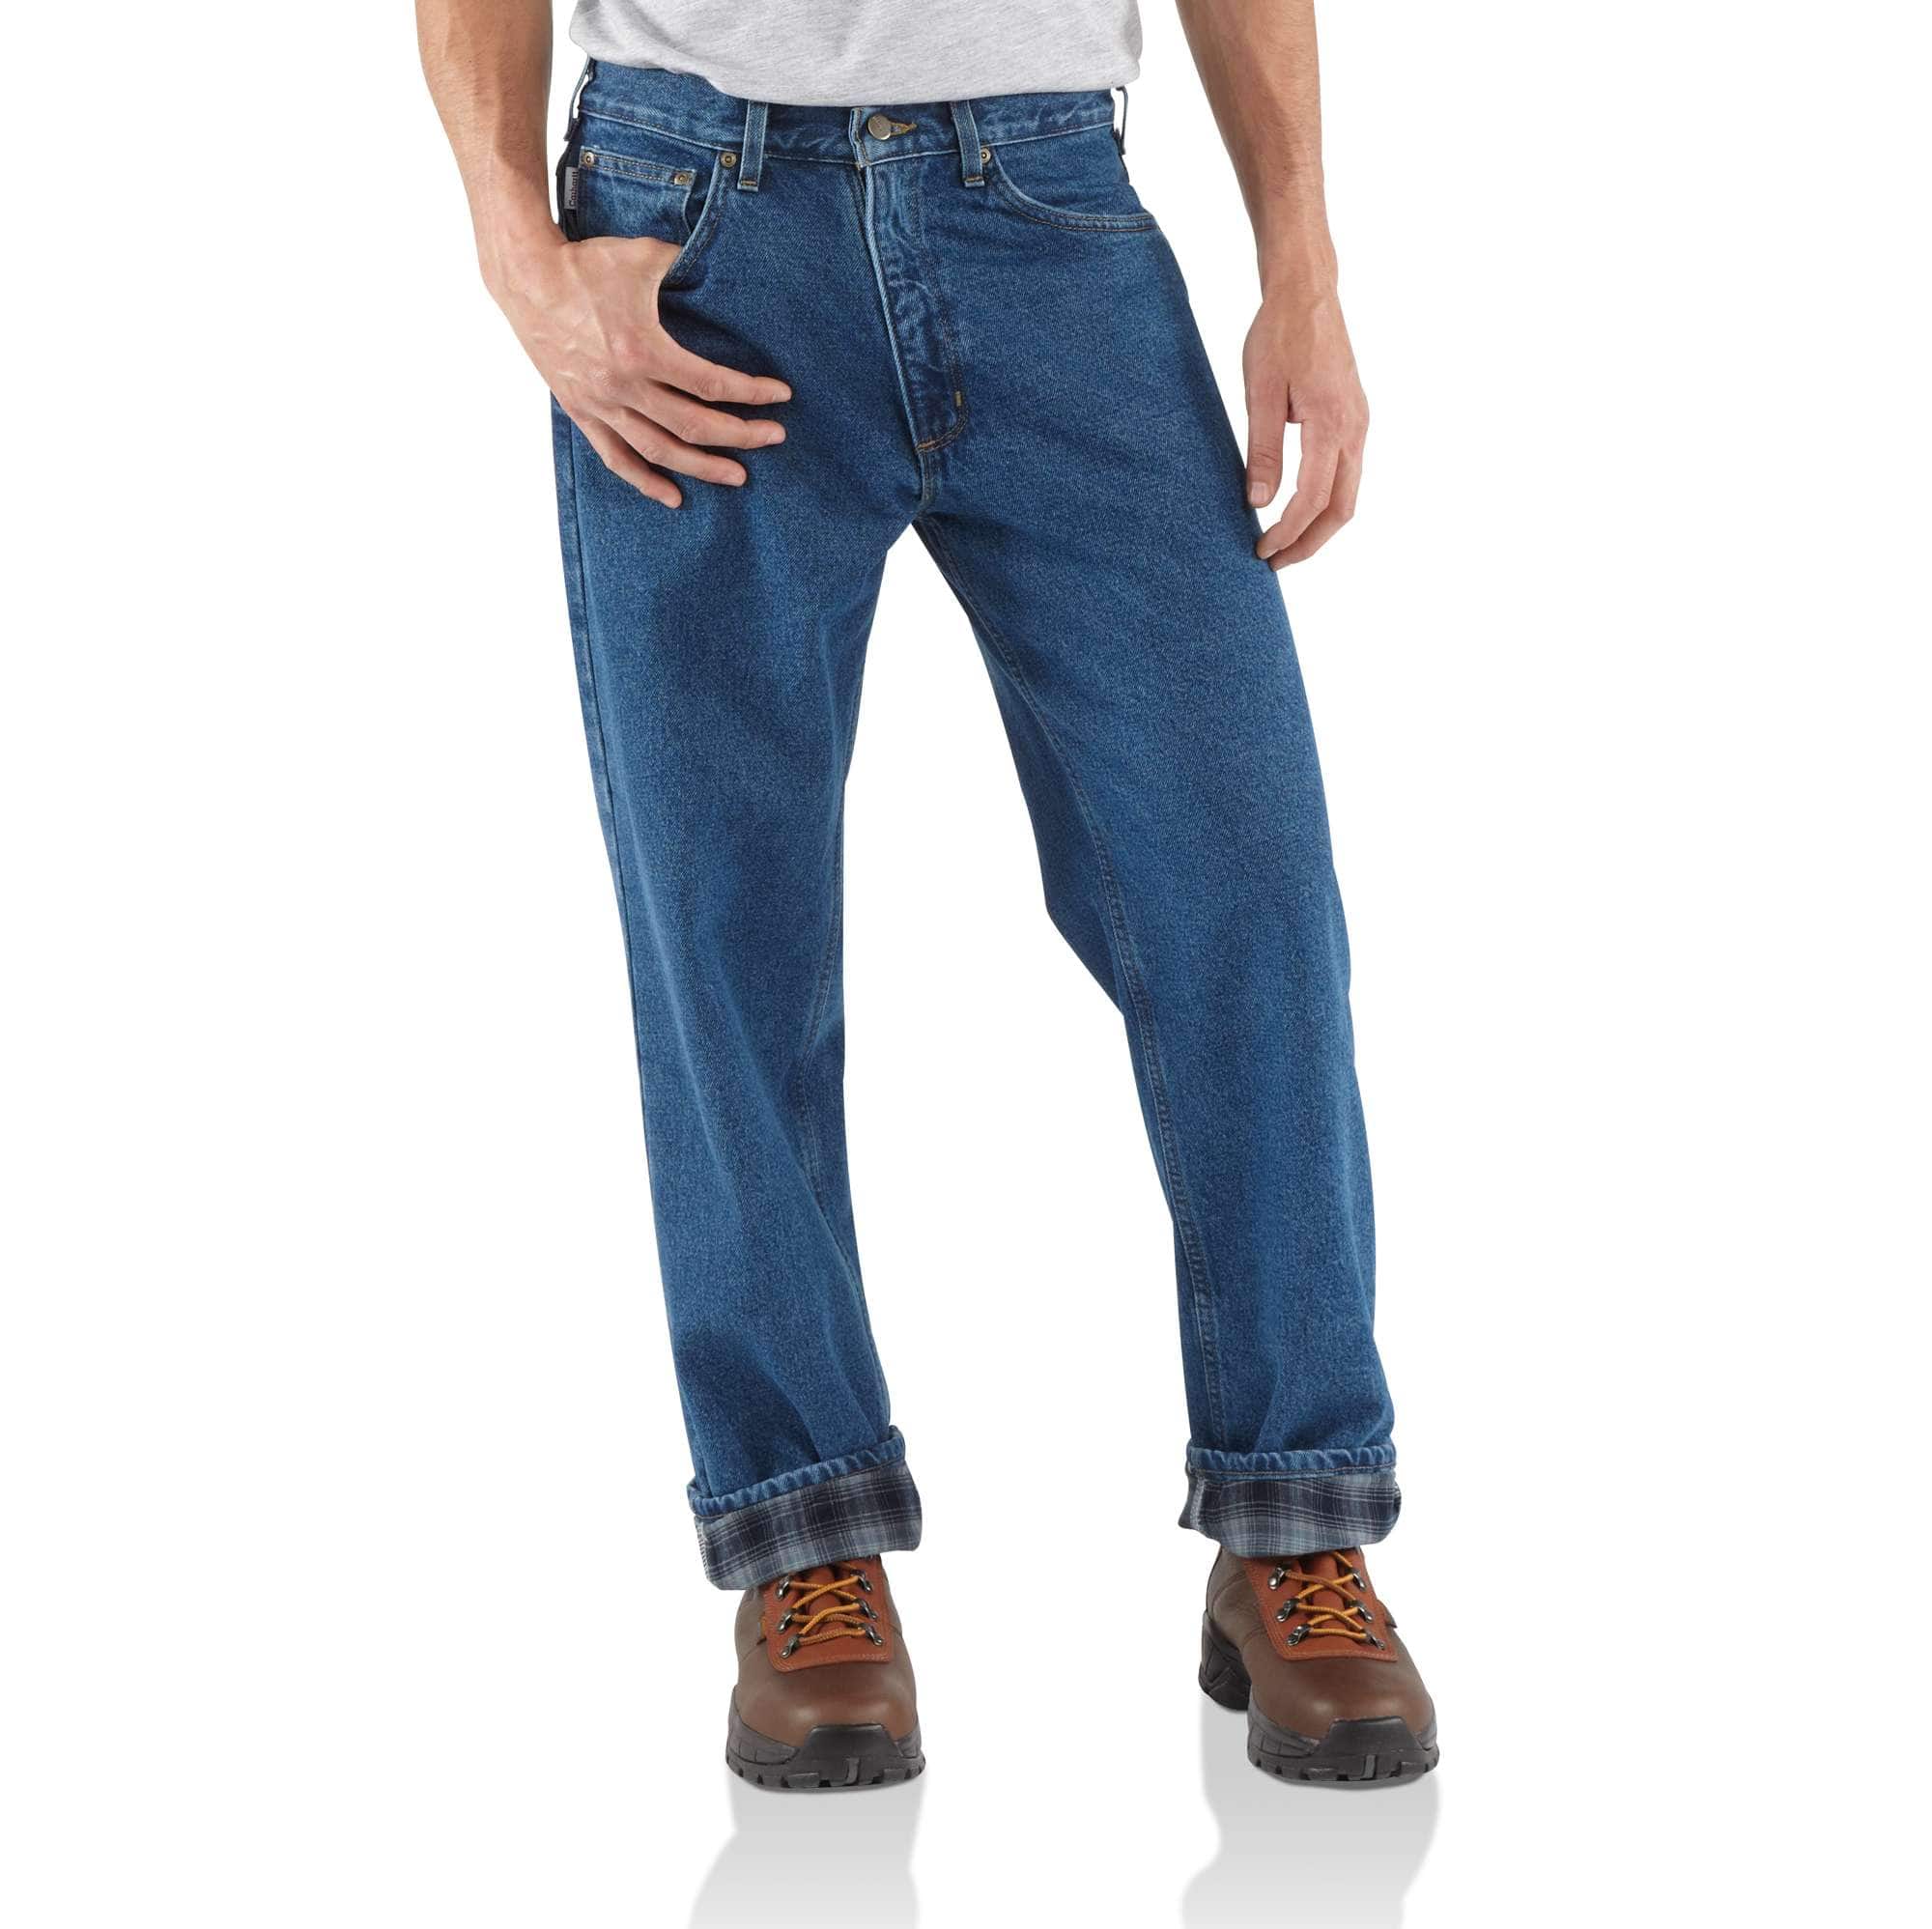 levis insulated jeans